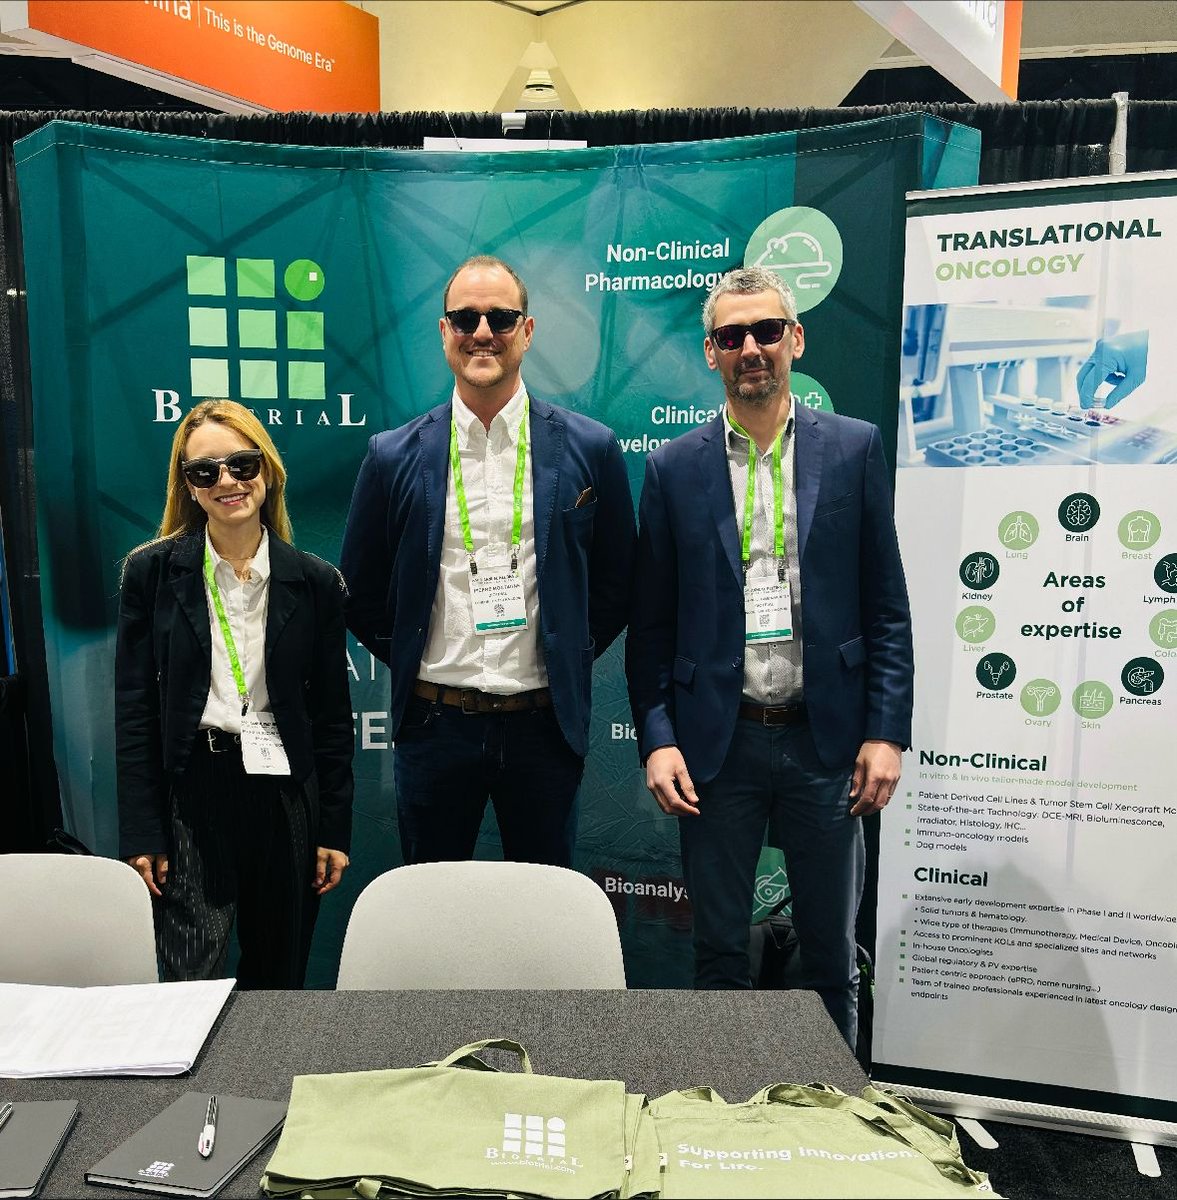 Join Biotrial's team at the 2024 AACR Annual Meeting in San Diego booth #115! Yesterday was the presentation of our poster about #tumorcells. Missed it? Stop by our booth for an exclusive walk-through!
#AACRAnnualMeeting #oncology